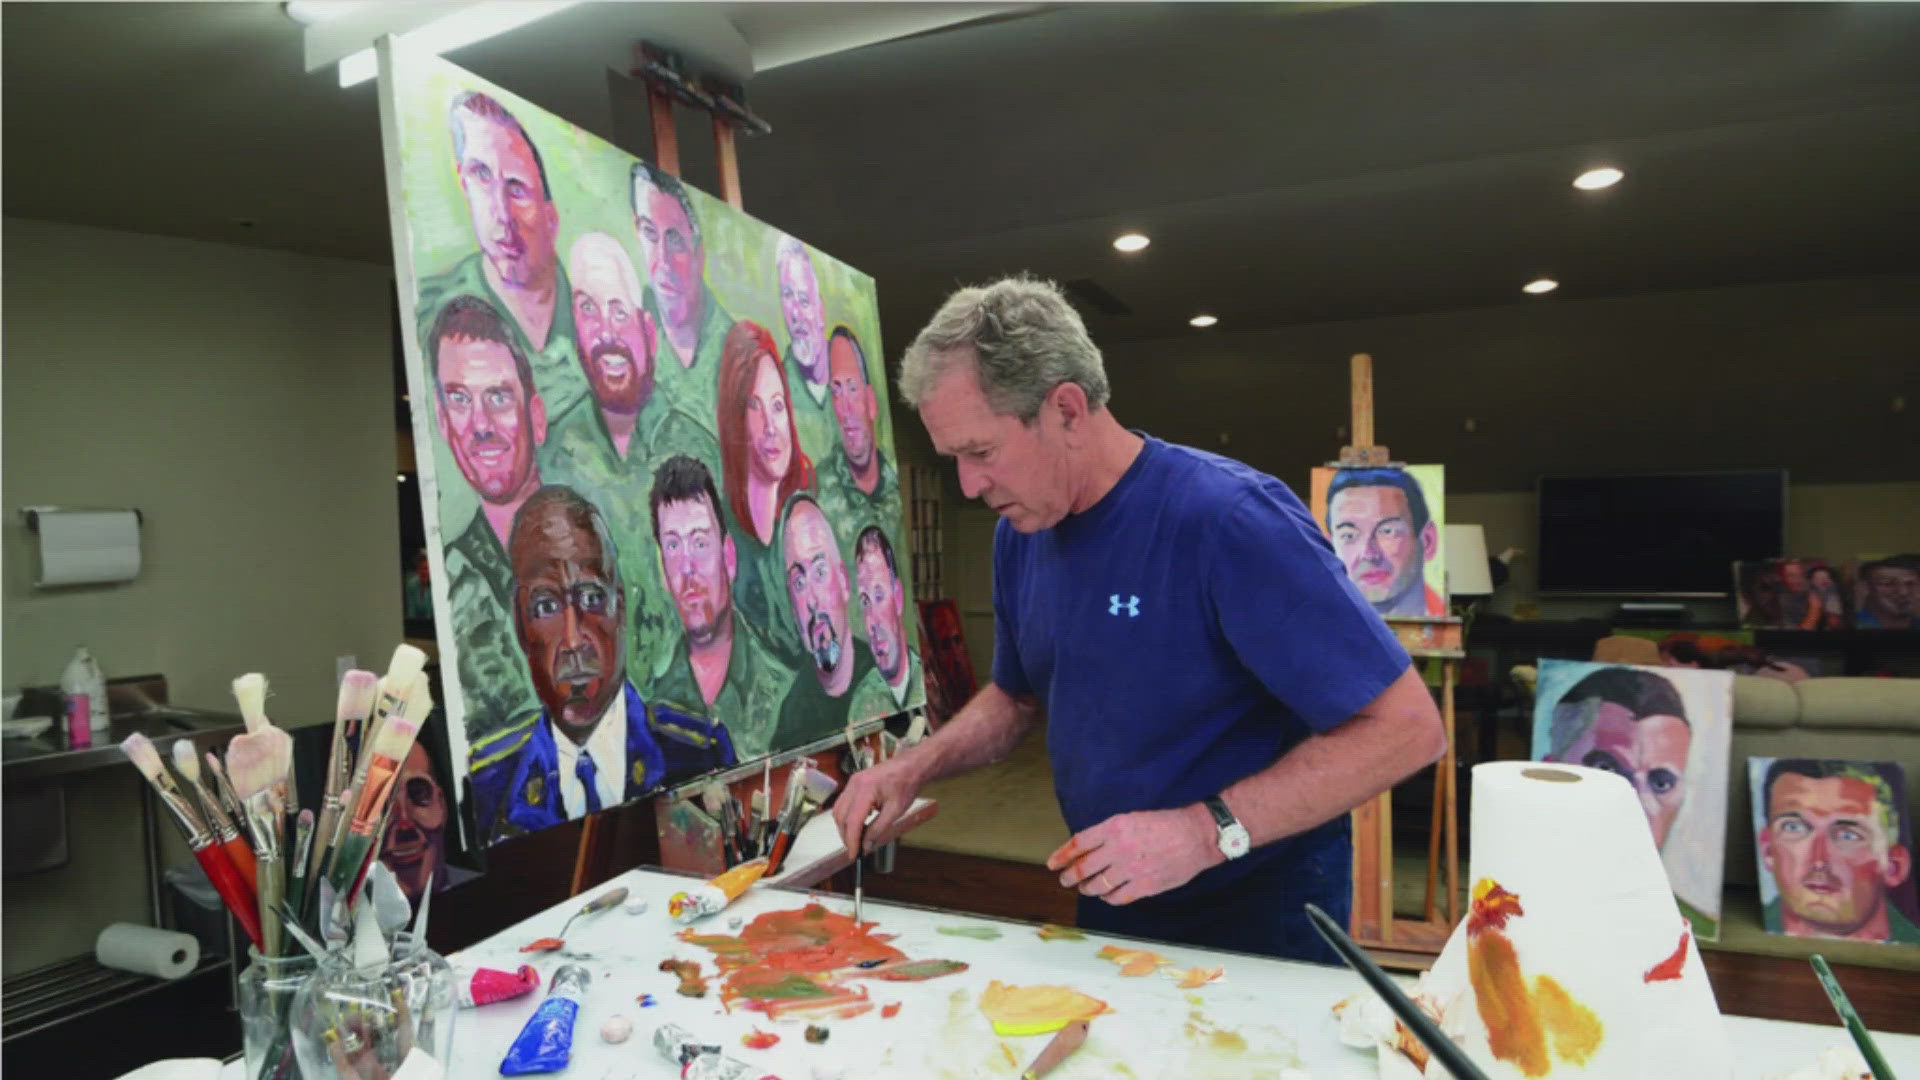 Walt Disney World will be hosting dozens of portraits of service members and veterans all painted by the former president.